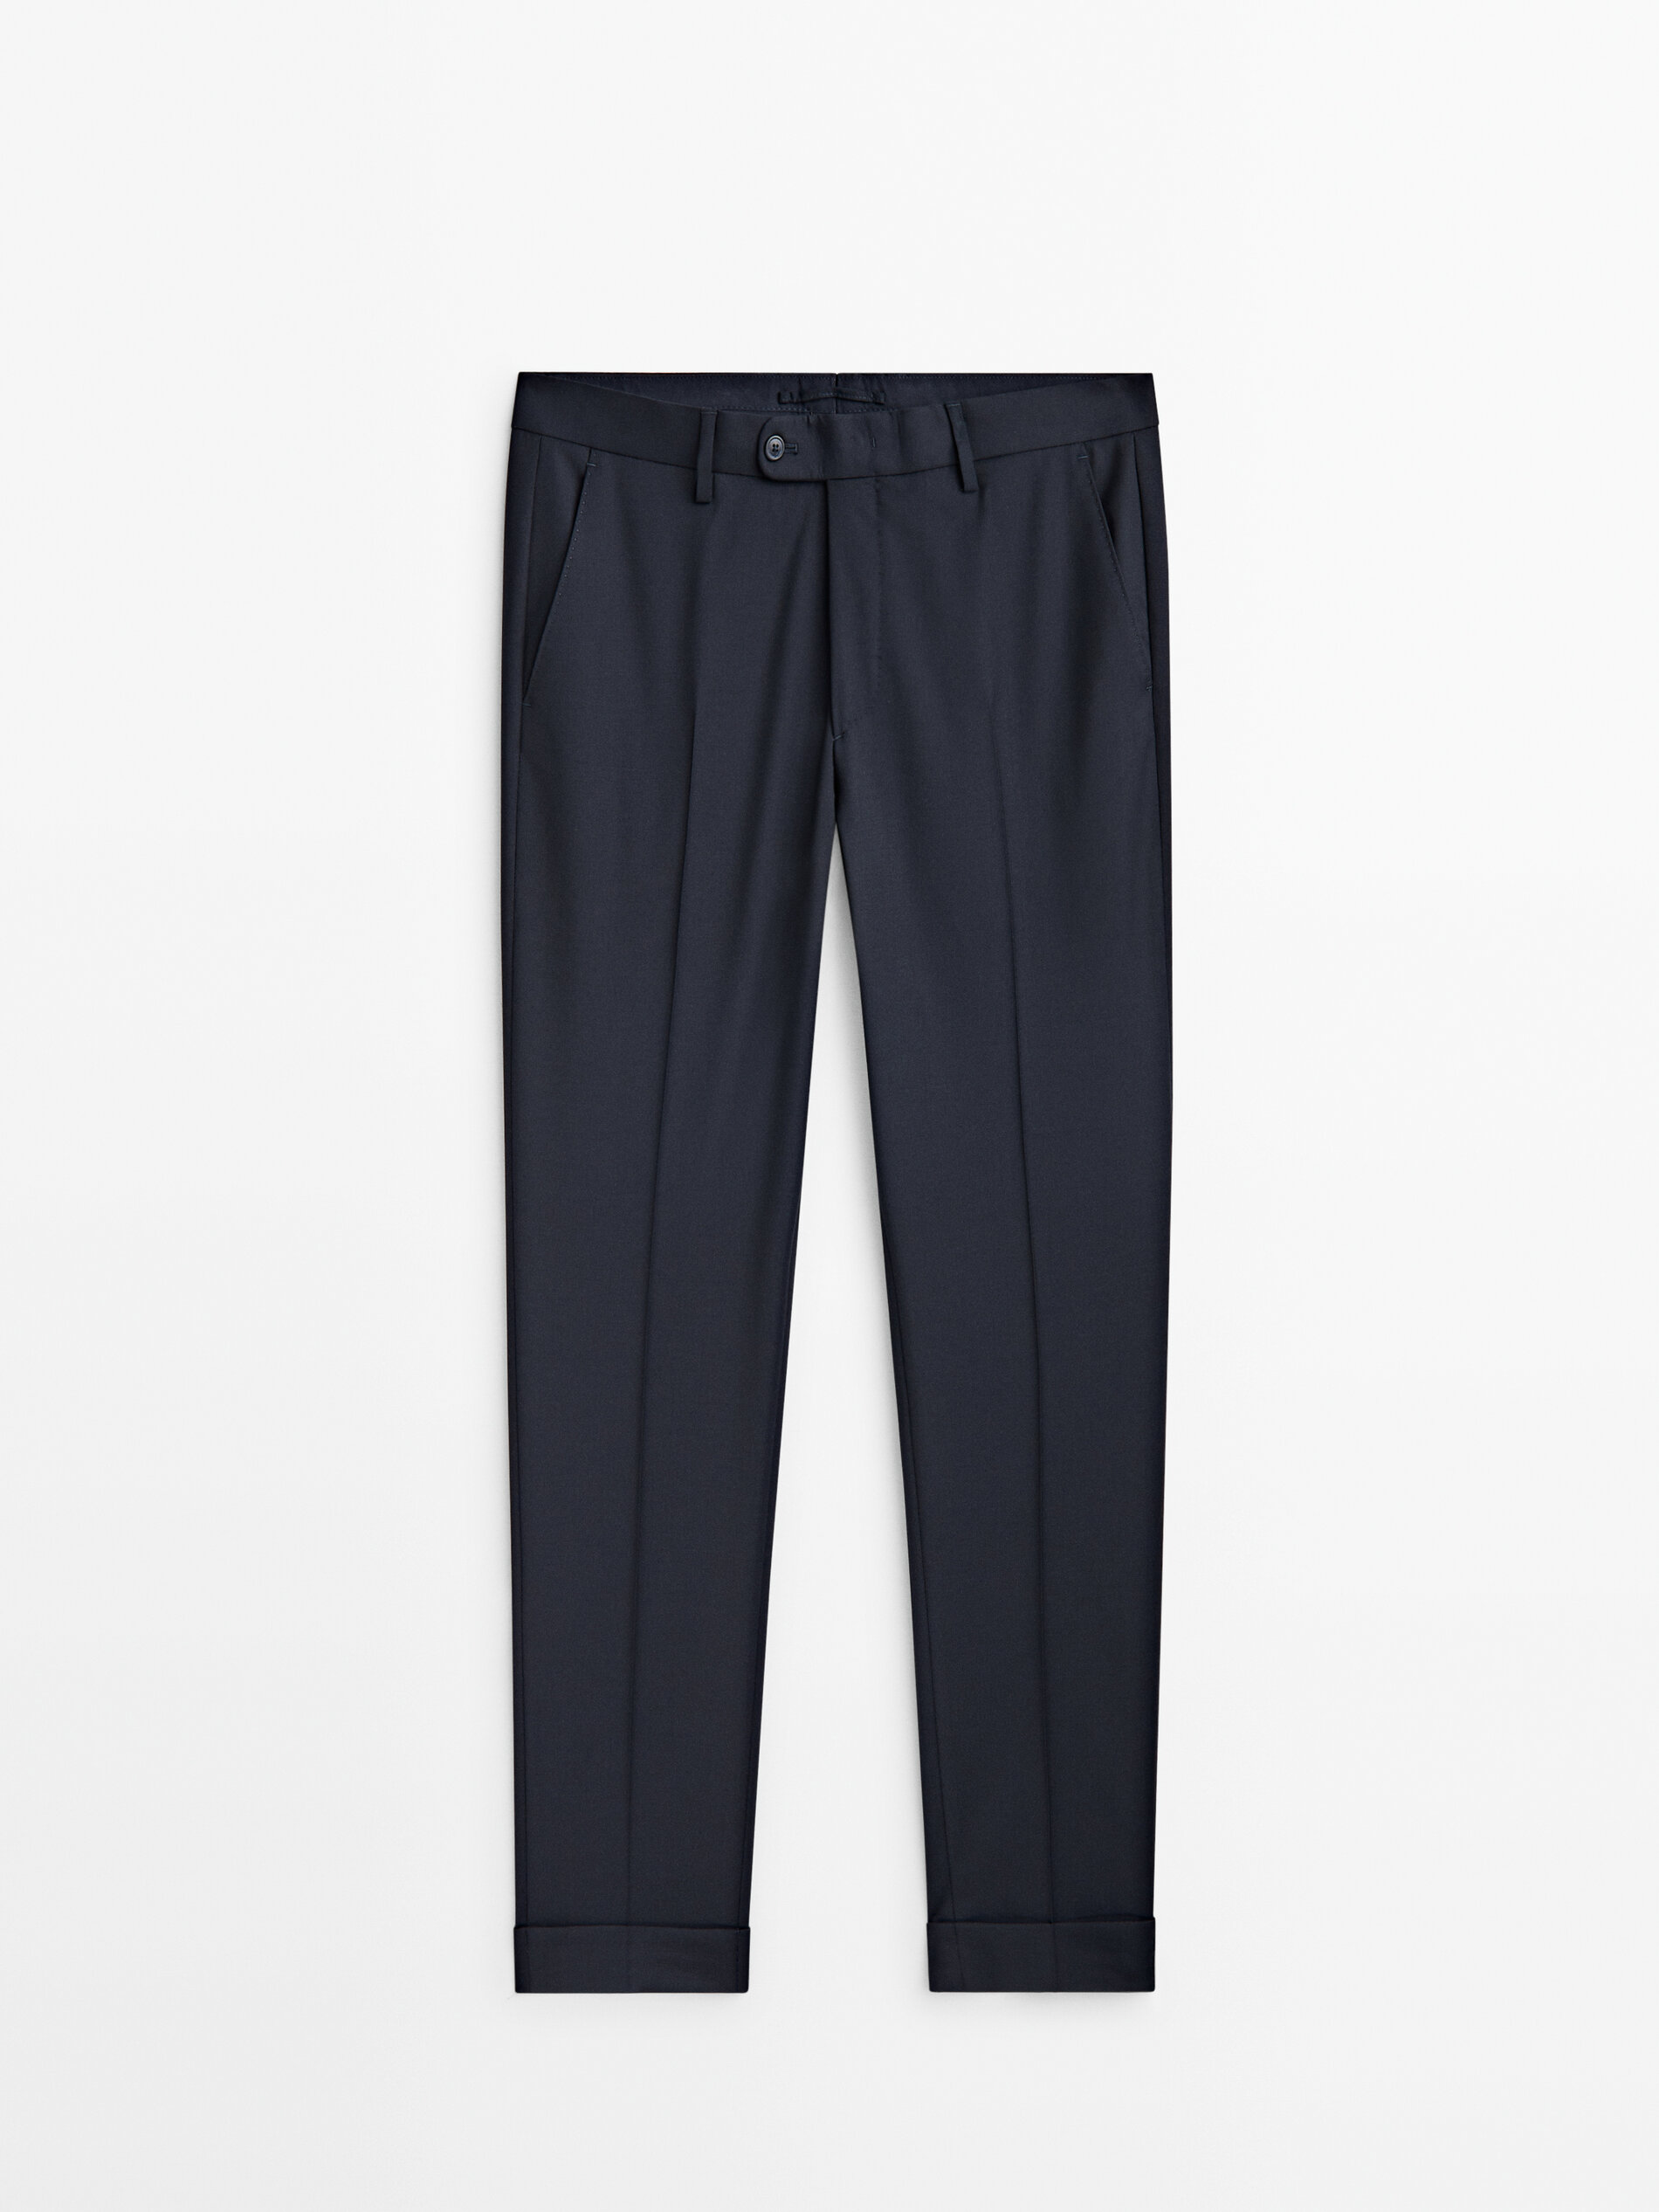 UNIQLO WOOL TROUSERS (BLACK), Women's Fashion, Bottoms, Other Bottoms on  Carousell